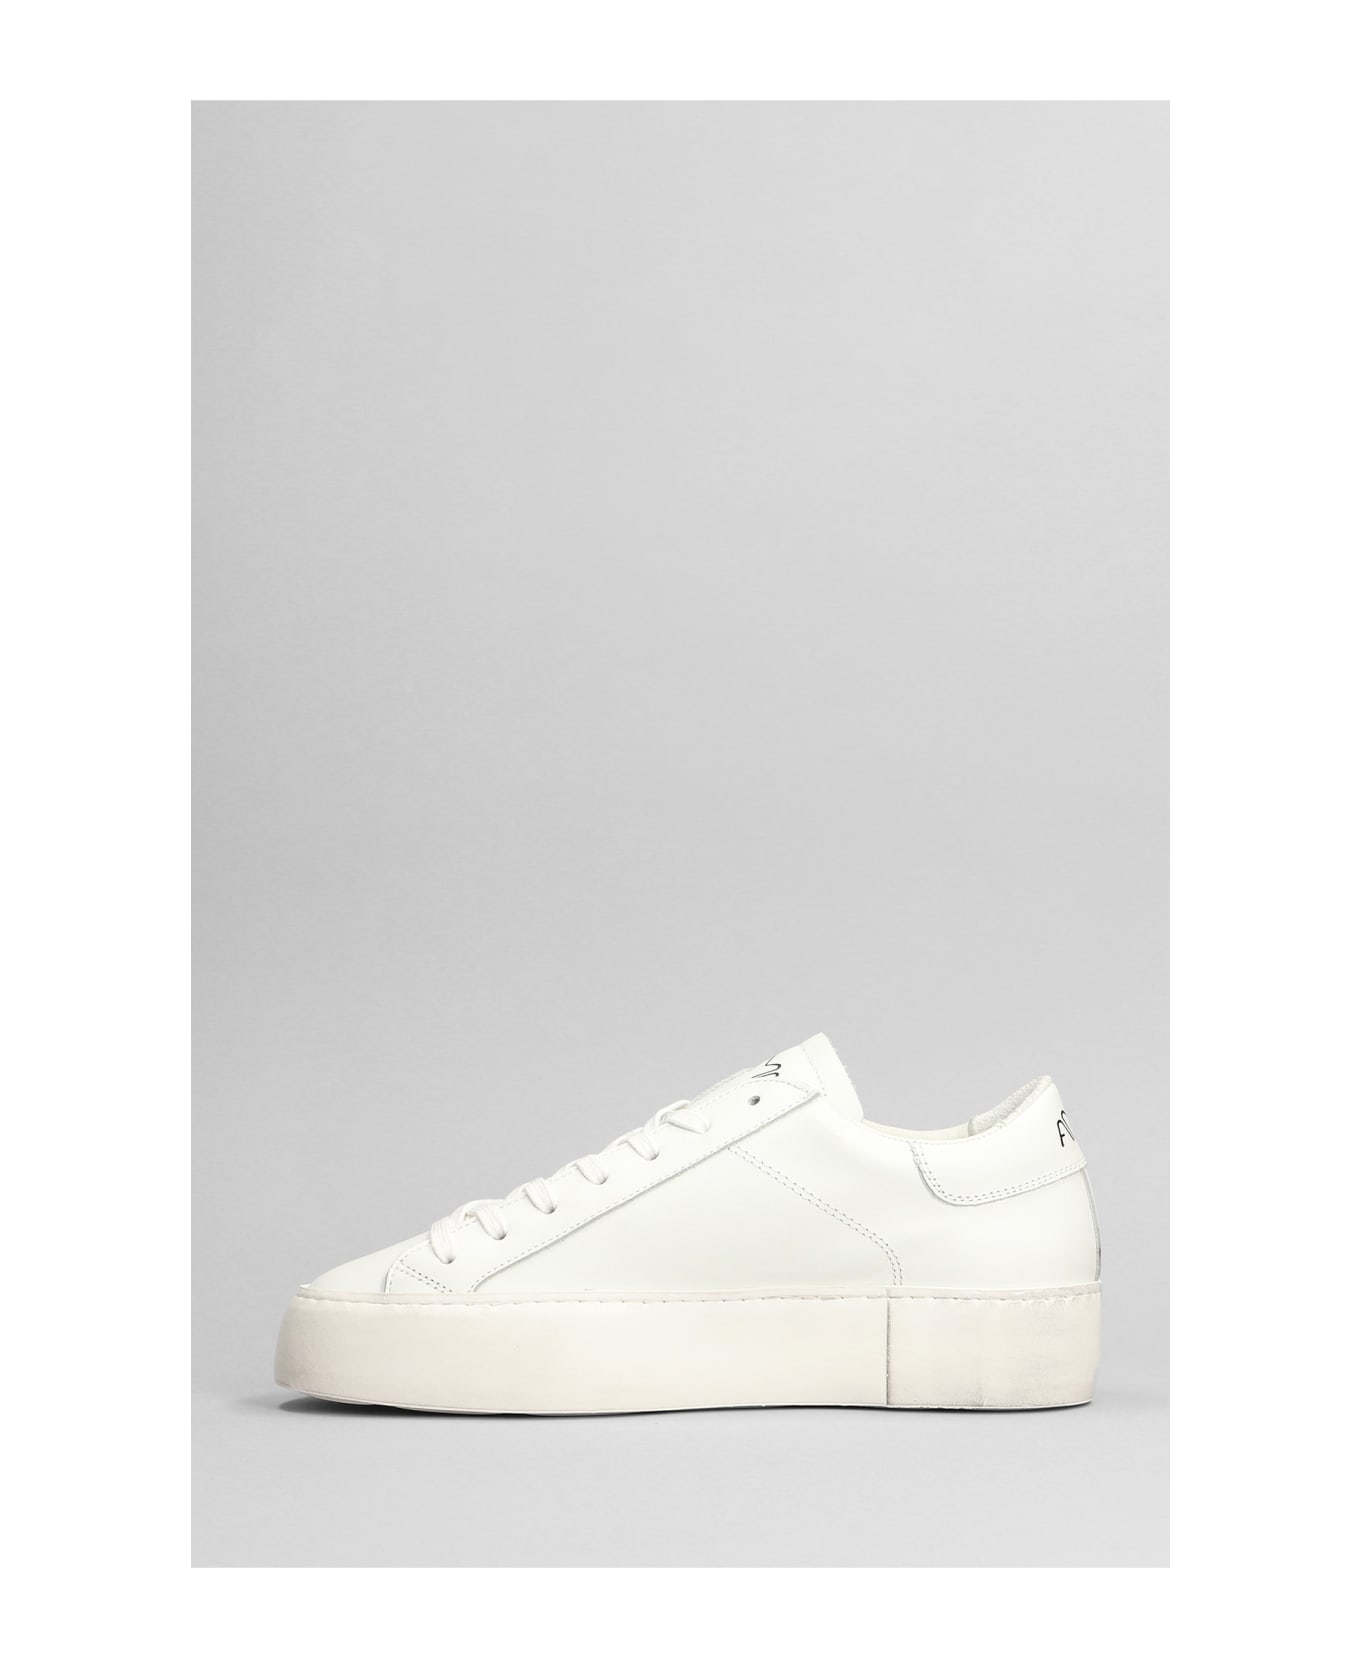 AMA-BRAND Sneakers In White Leather - white ウェッジシューズ